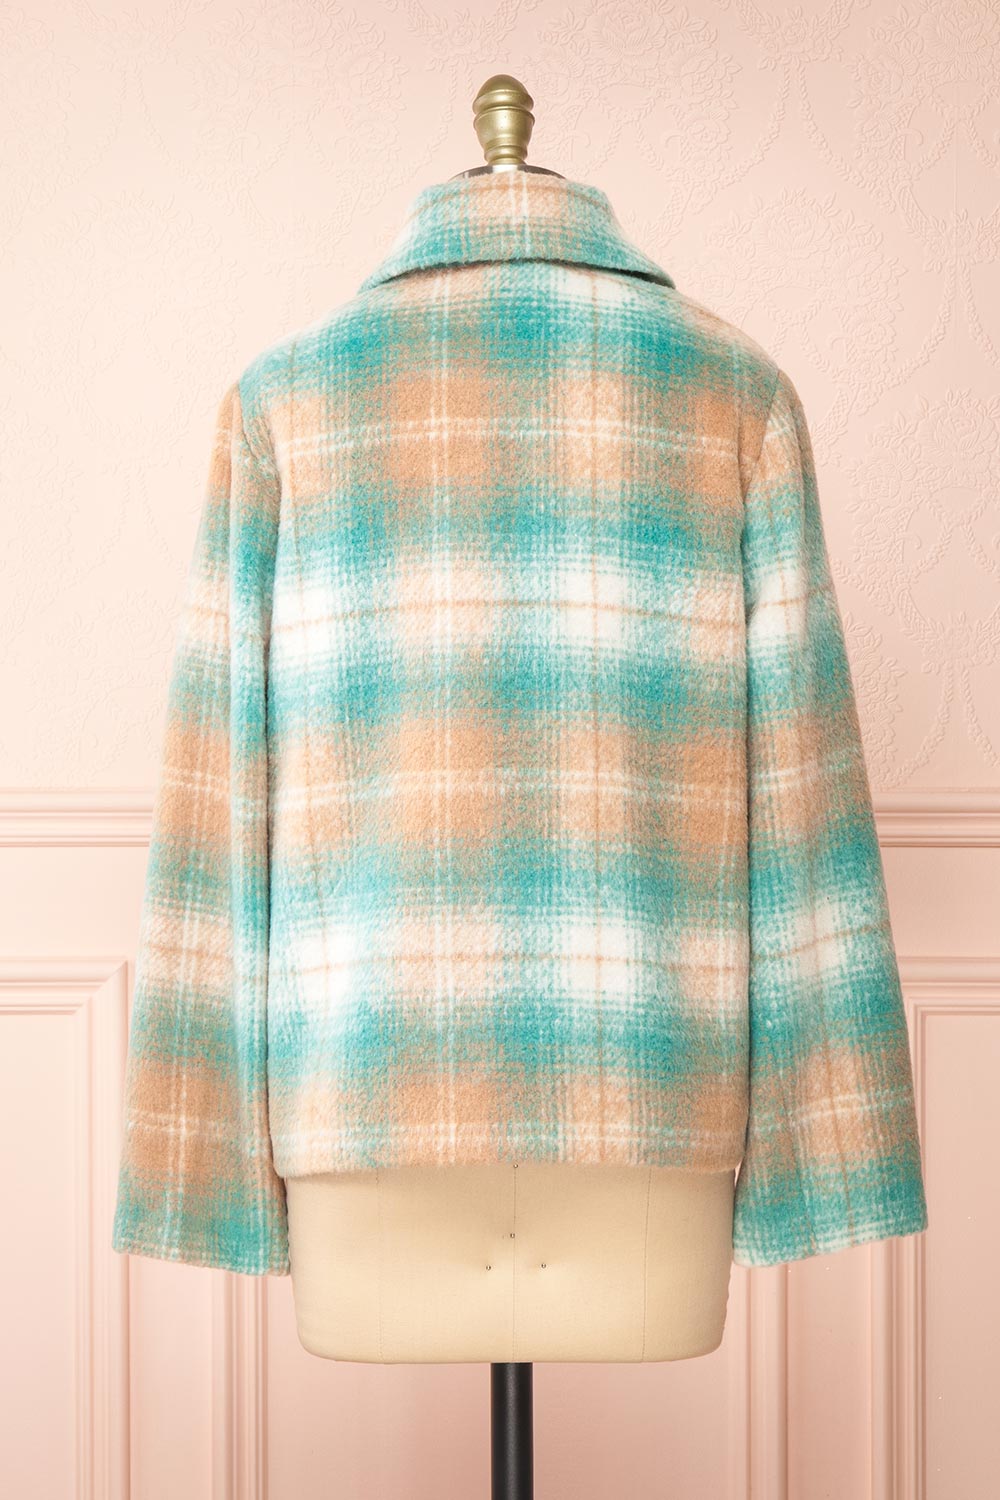 Sirennah Teal Vintage Style Tartan Coat | Boutique 1861 back view